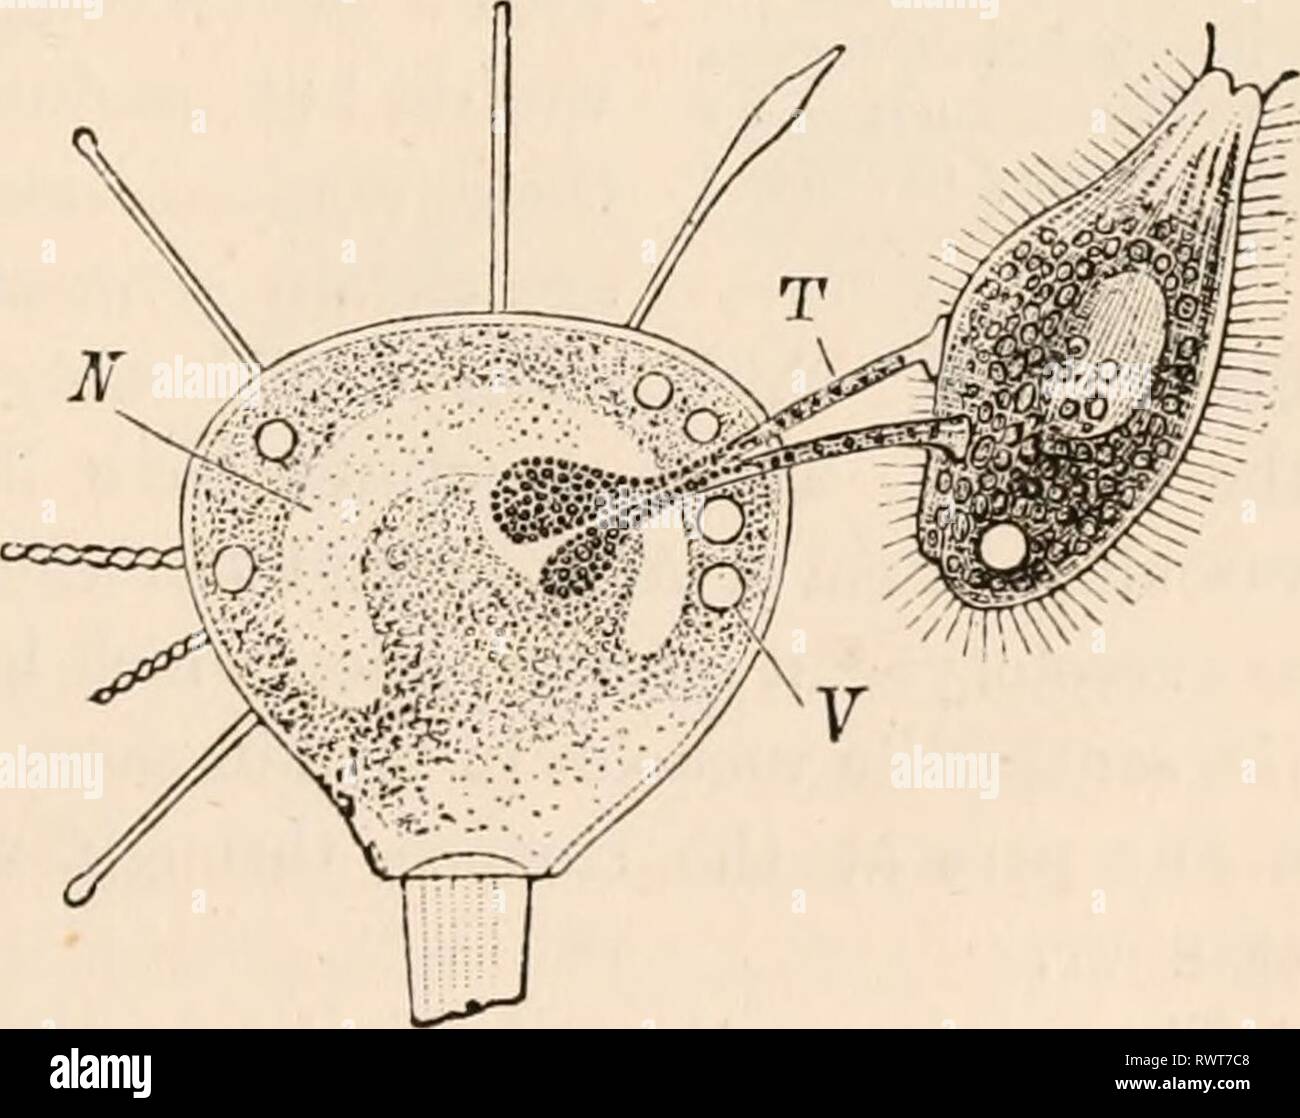 Elementary text-book of zoology, tr Elementary text-book of zoology, tr. and ed. by Adam Sedgwick, with the assistance of F. G. Heathcote elementarytextbo01clau Year: 1892-1893  FIG. pullet; vacuole FT, pulsatinp 2V, nucleus. granular axis of the the latter travels down the tentacle into the body of the Acineta (fig. 139). By far the greatest num- ber of Infusoria possess an oral aperture, usually near the anterior pole of the body, and a second aperture which acts as anus, and which can be seen in a definite part of the body as a slit during the exit of the excreta. rrii 11 i Fio. 139. — Acin Stock Photo